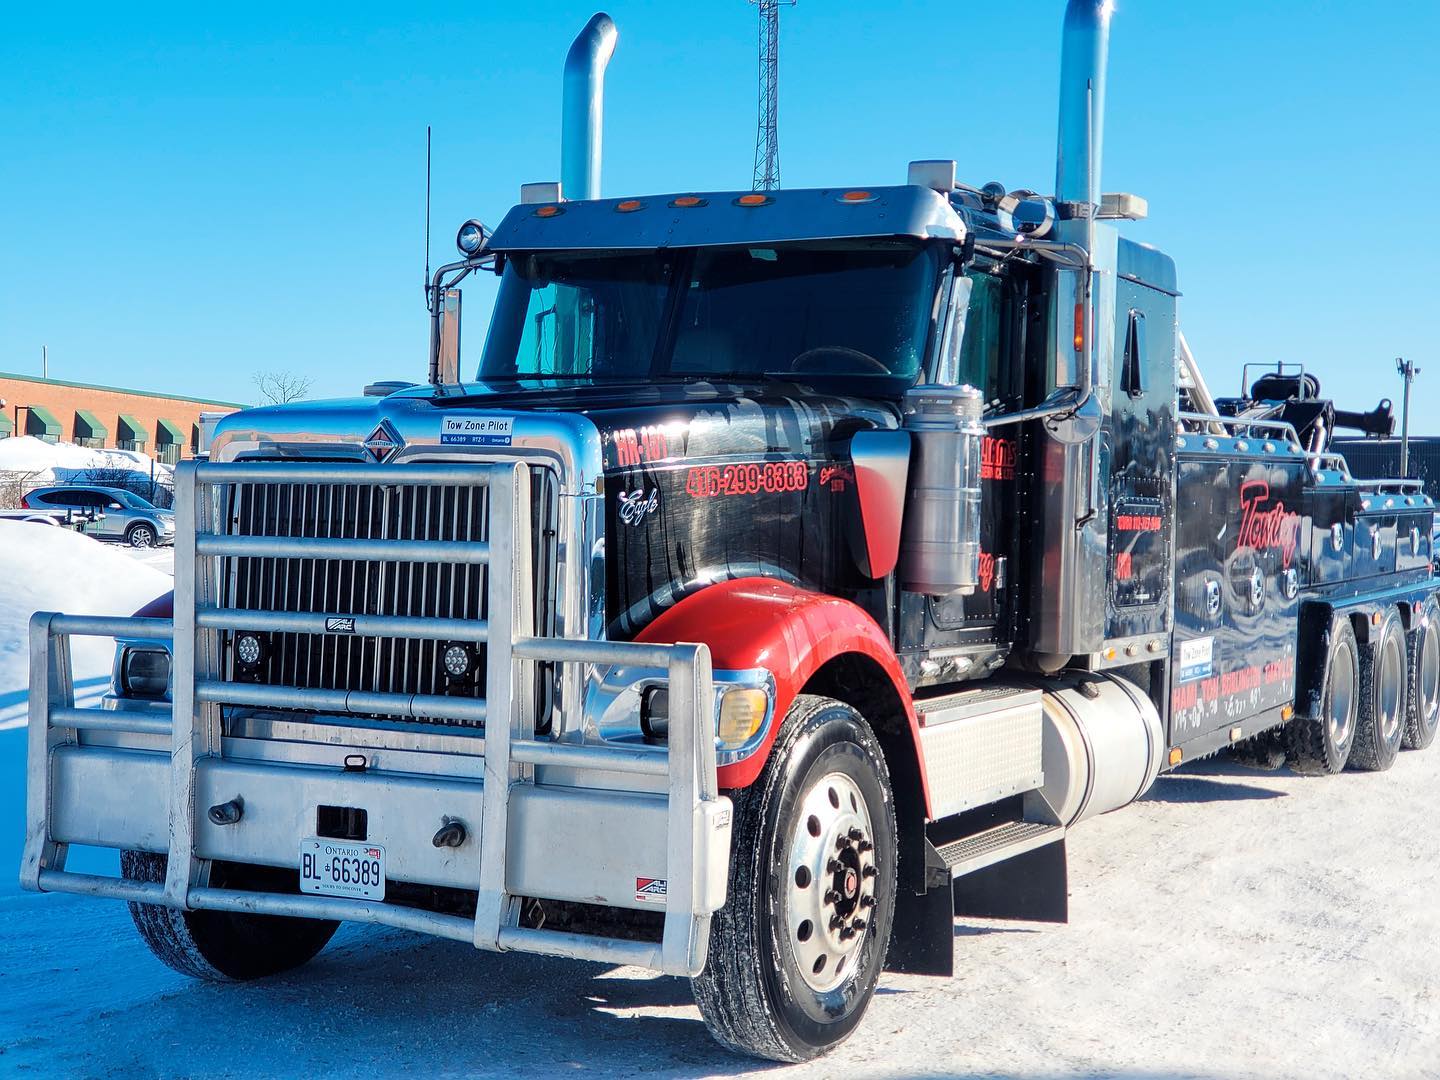 Williams Towing - Premier Breakdown Towing Services in Toronto | Williams Towing